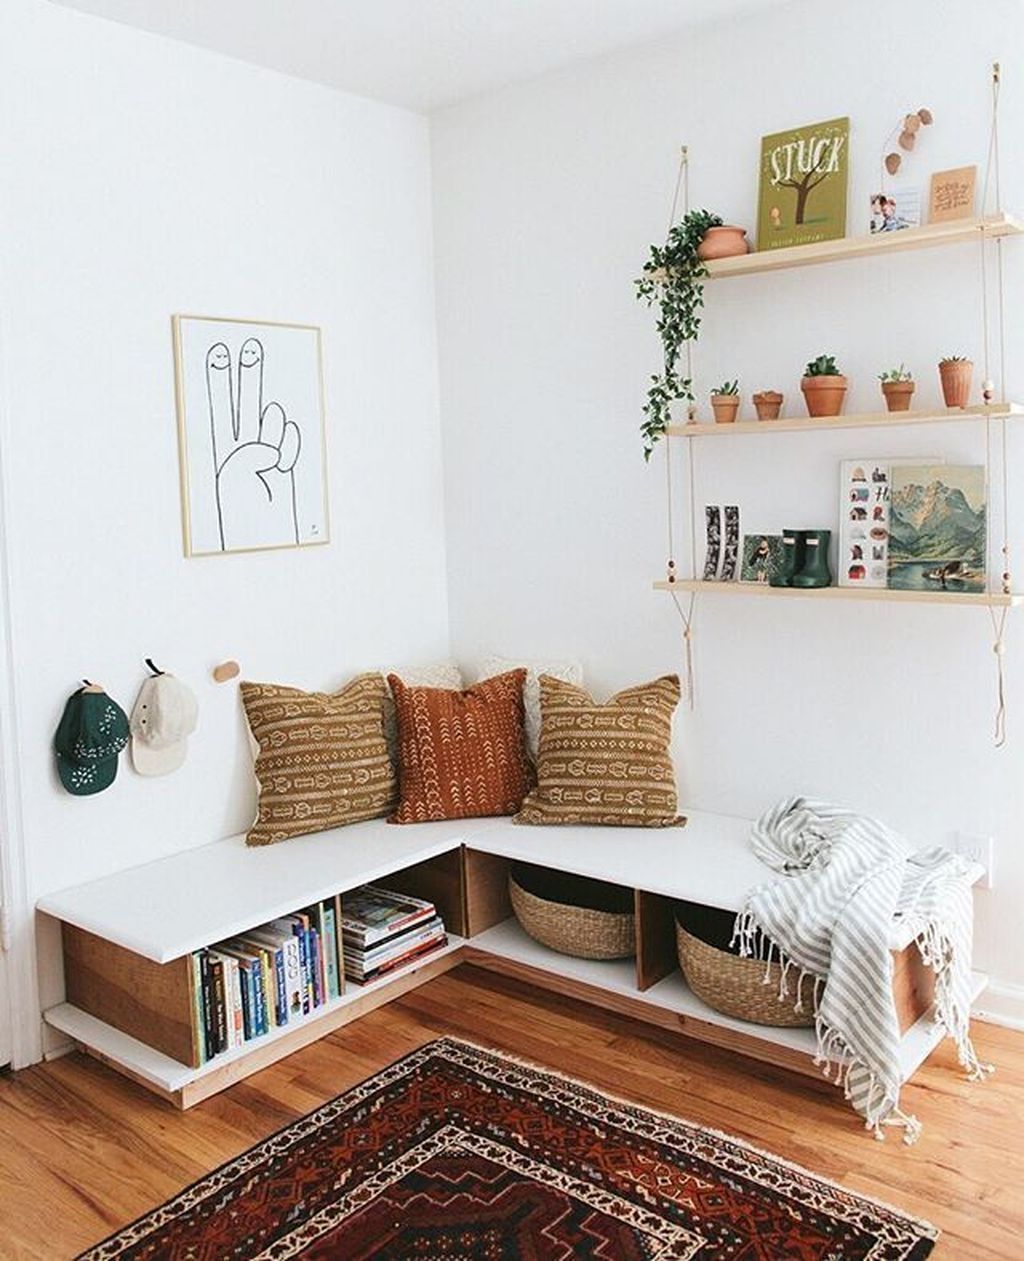 20+ Charming Home Decor Ideas That Trending Today